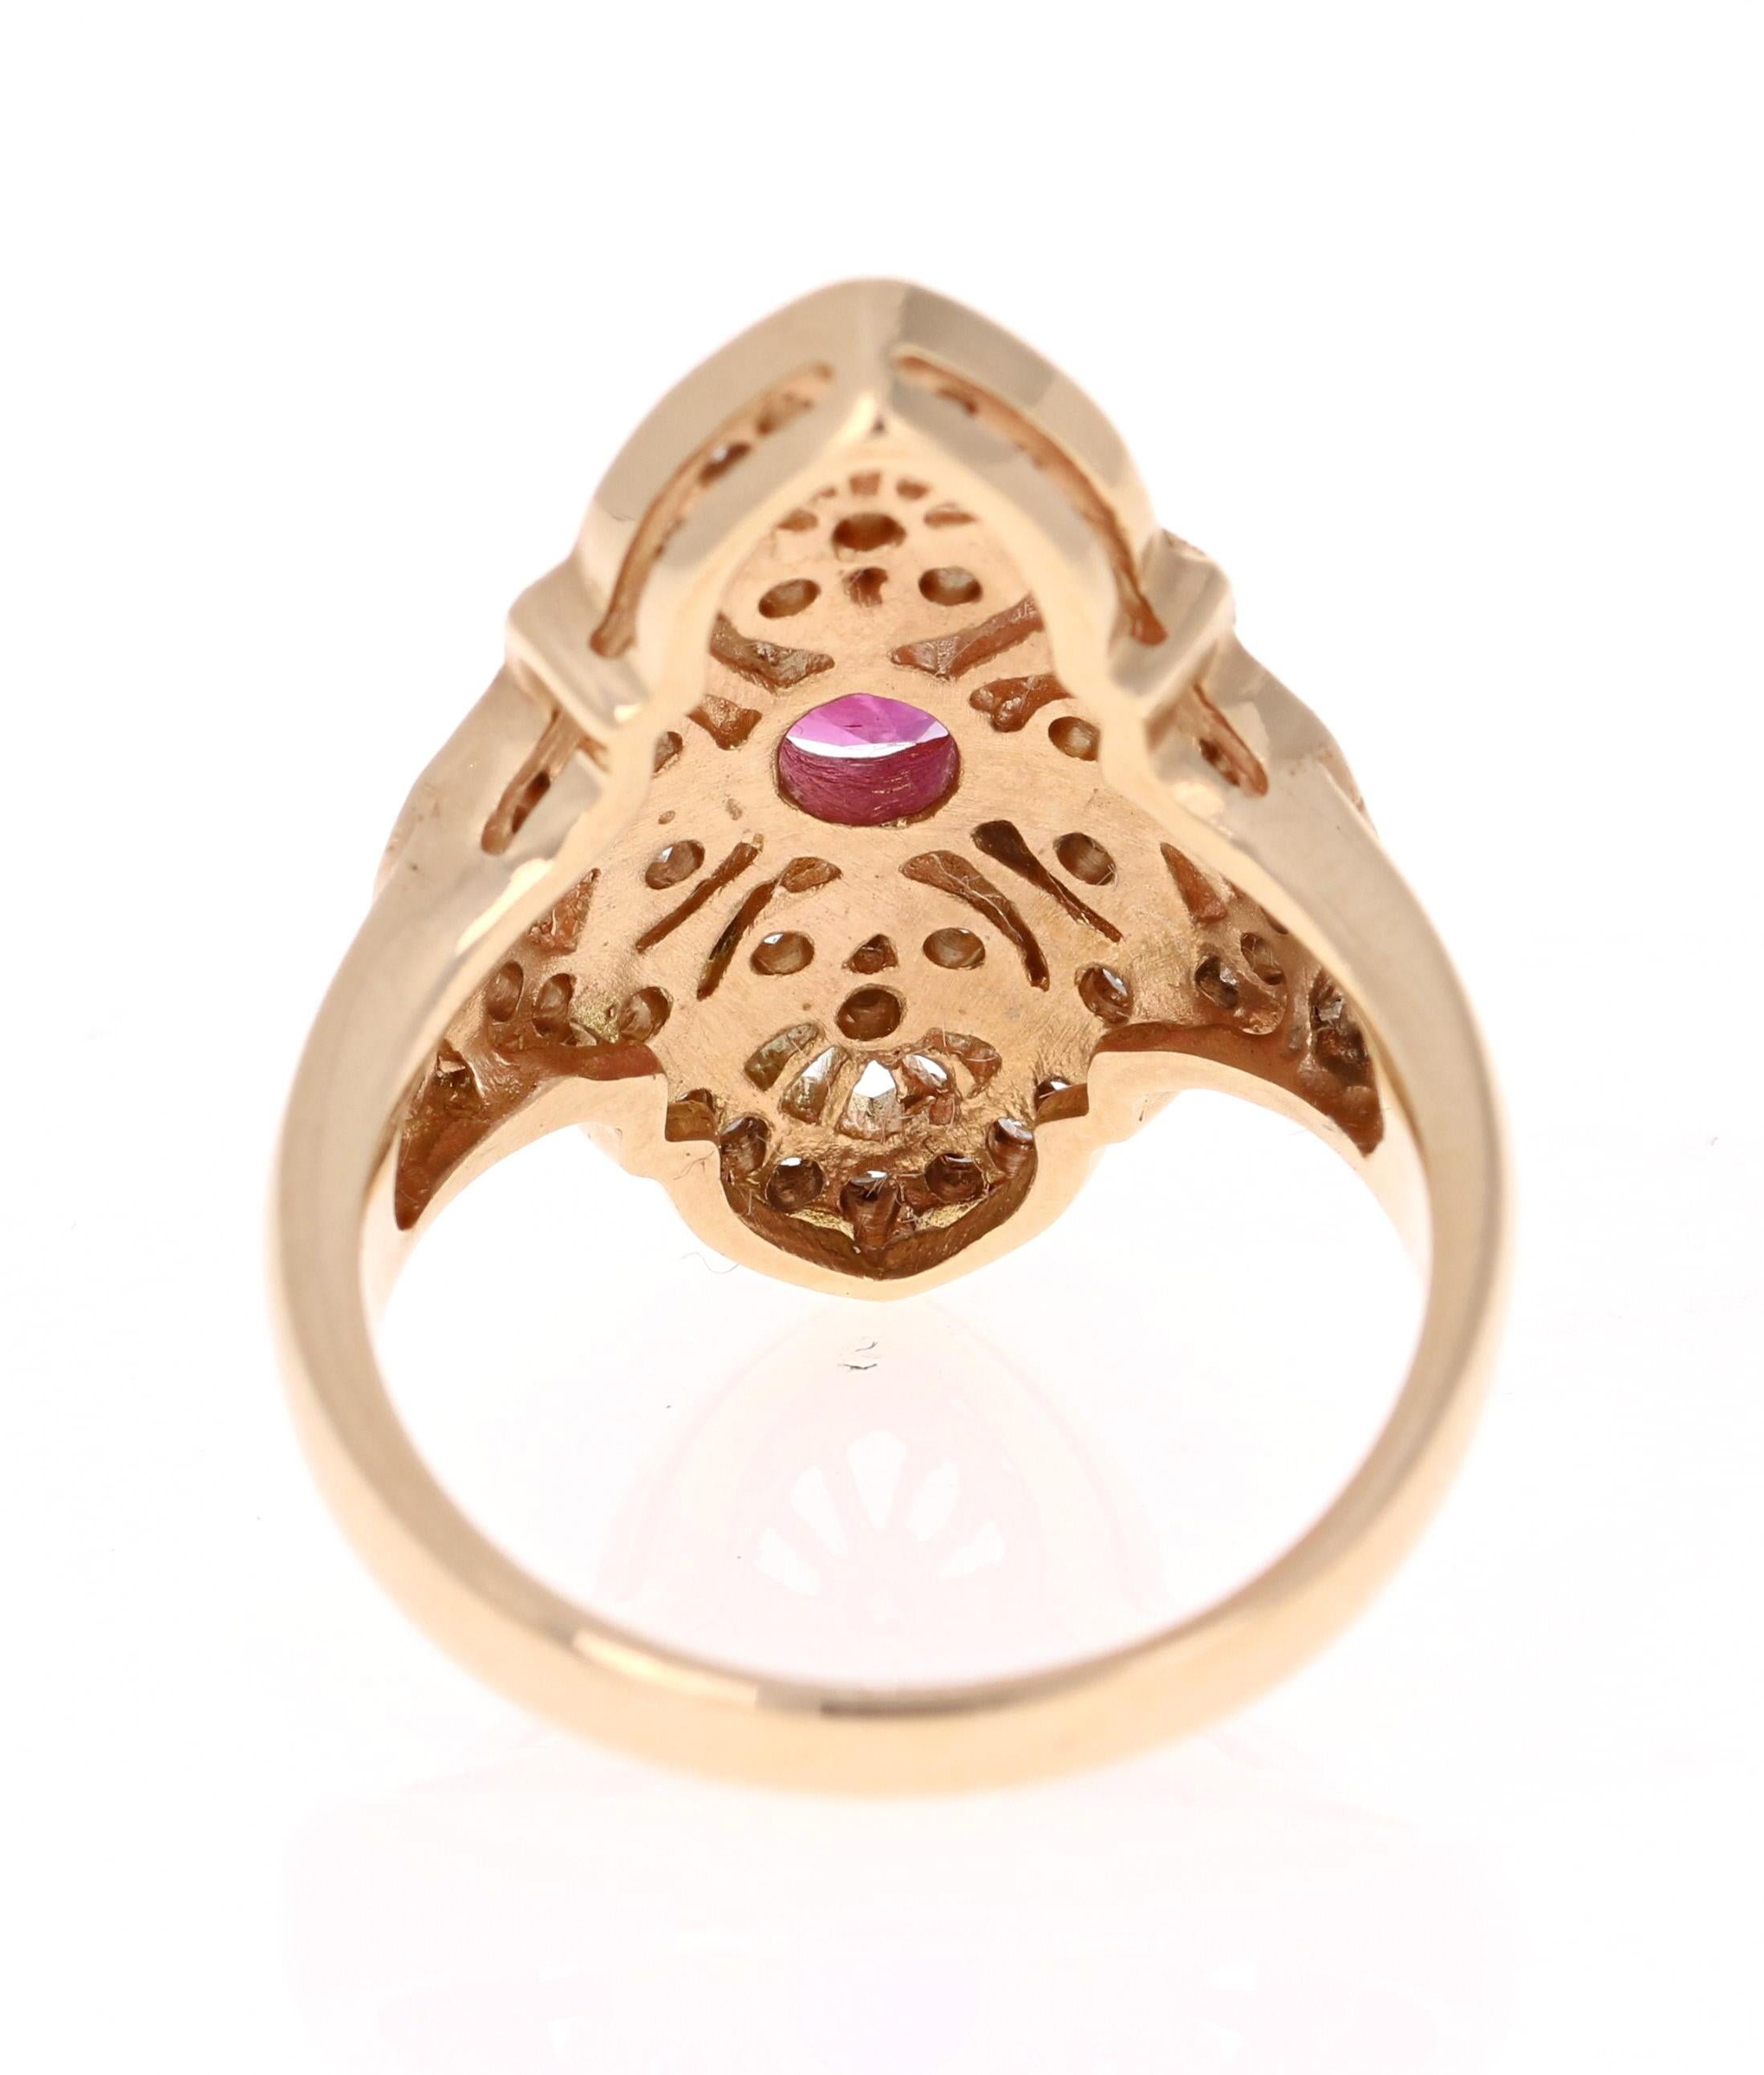 Oval Cut 1.34 Carat Ruby Diamond 14 Karat Yellow Gold Victorian Style Ring For Sale